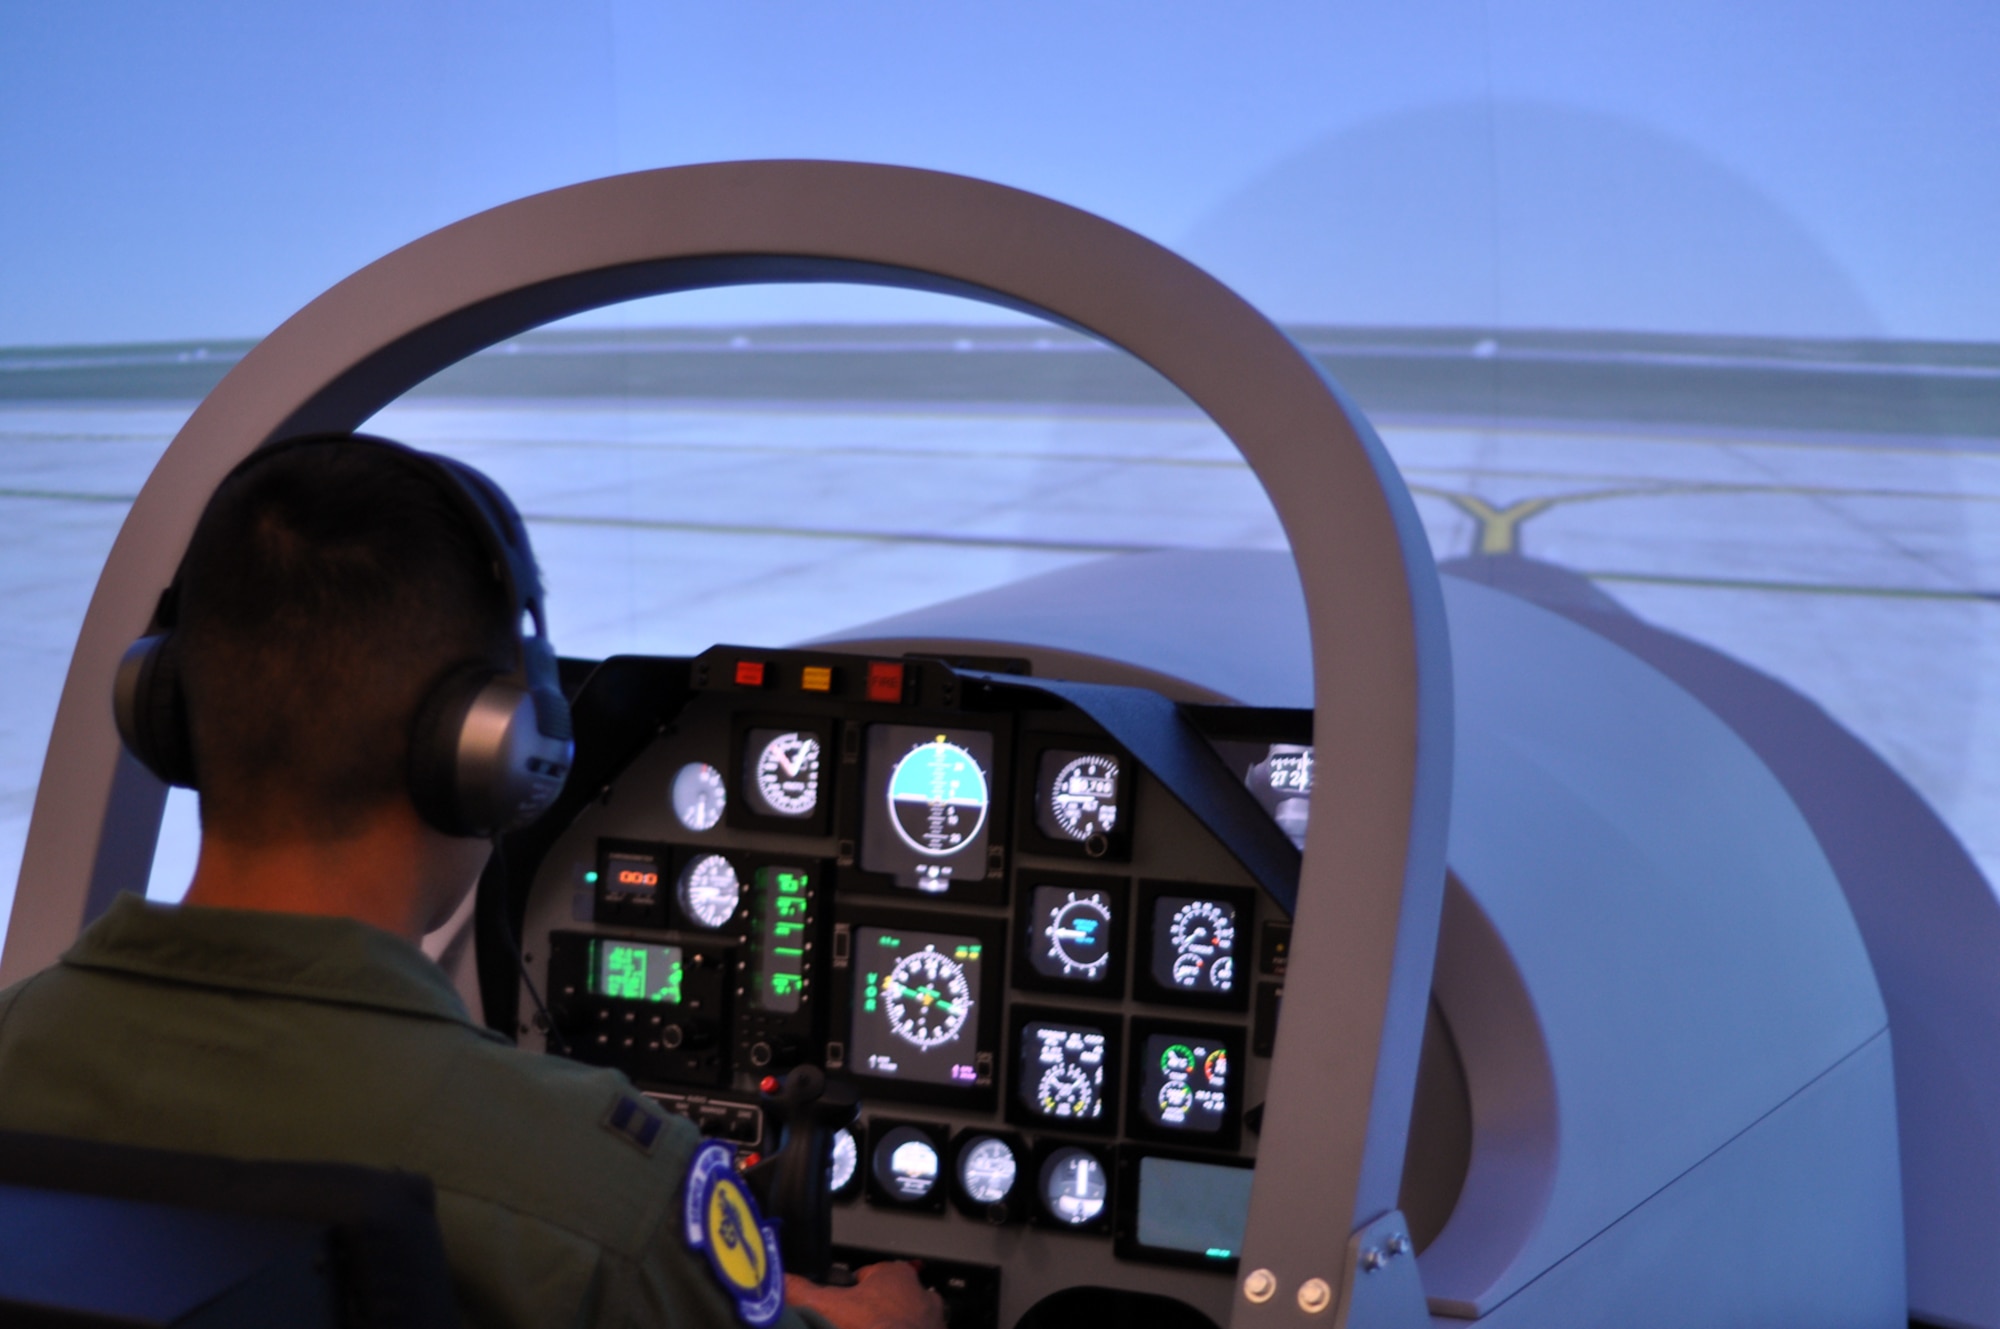 A student pilot enrolled in Undergraduate Remotely Piloted Aircraft Training at the 558th Flying Training Squadron, Joint Base San Antonio-Randolph, Texas, prepare to taxi prior to takeoff in a new T-6 Texan II simulator July 10. The new setup has dramatically increased the ability to train RPA pilots, and the ingenuity behind the new simulator saves the Air Force millions of dollars. EDITOR'S NOTE: The name were for security concerns. (U.S. Air Force photo/Staff Sgt. Clinton Atkins)